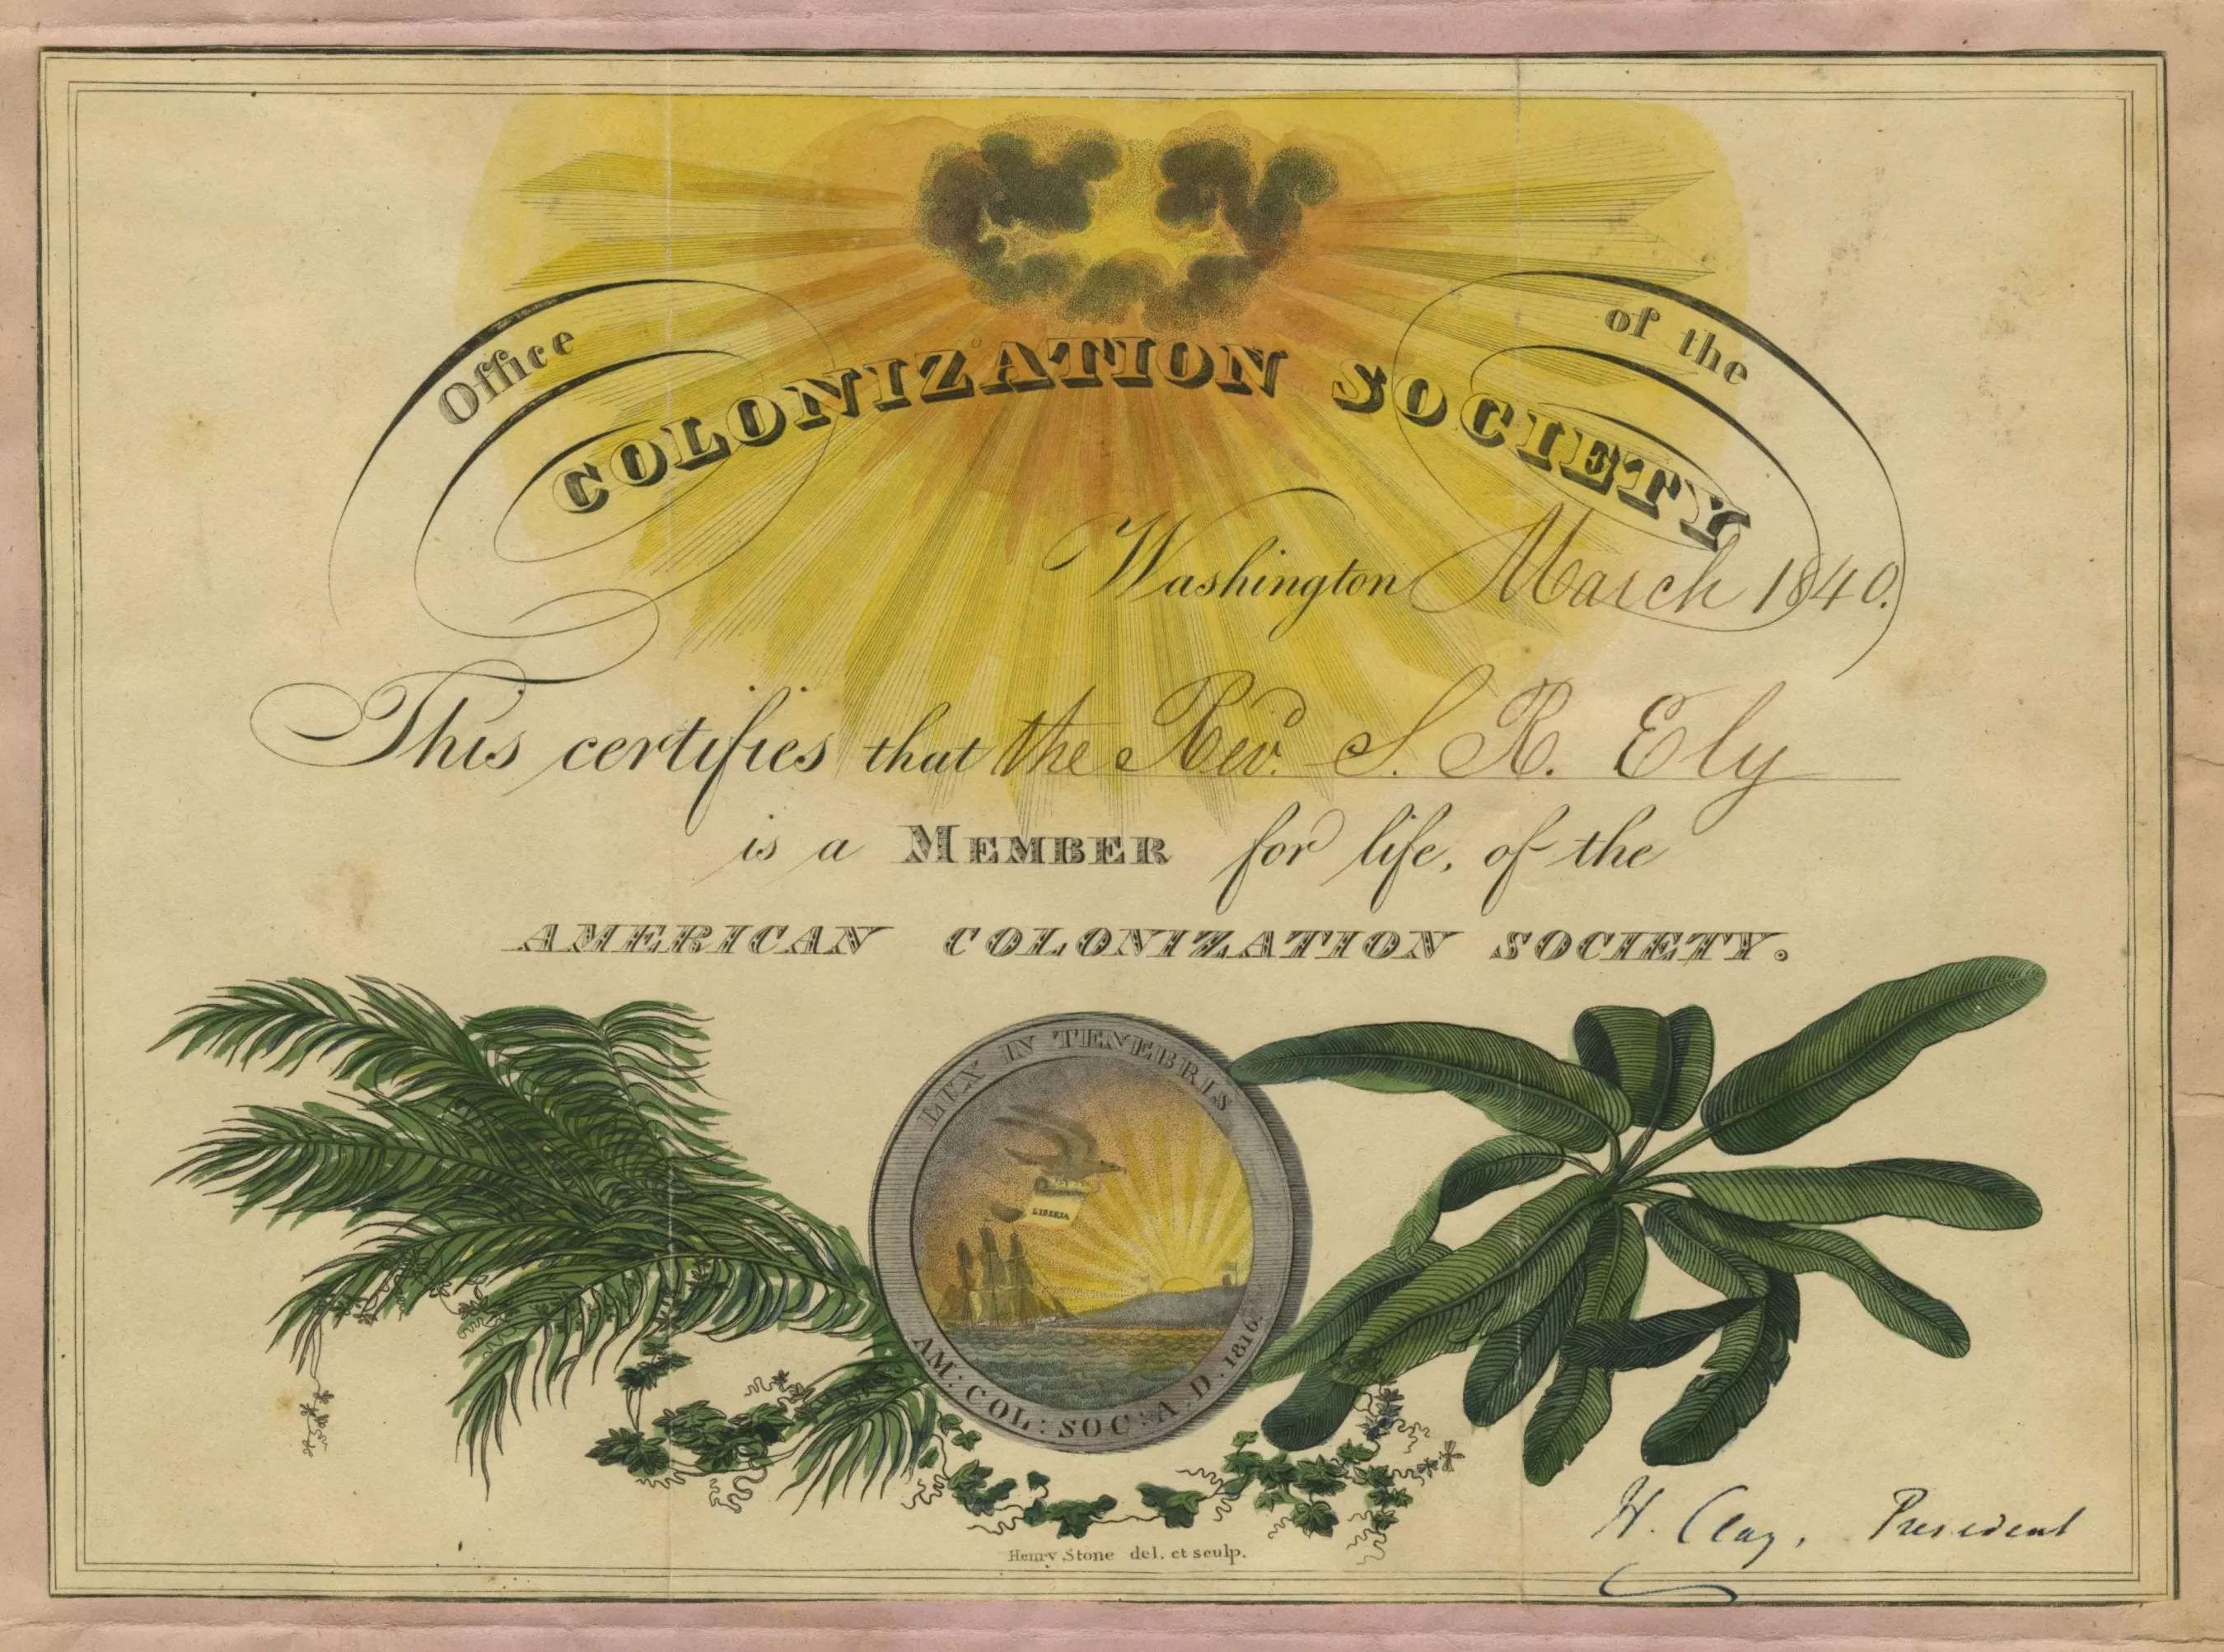 Membership certificate of Rev. Samuel Rose Ely, dated March 1840. Henry Clay